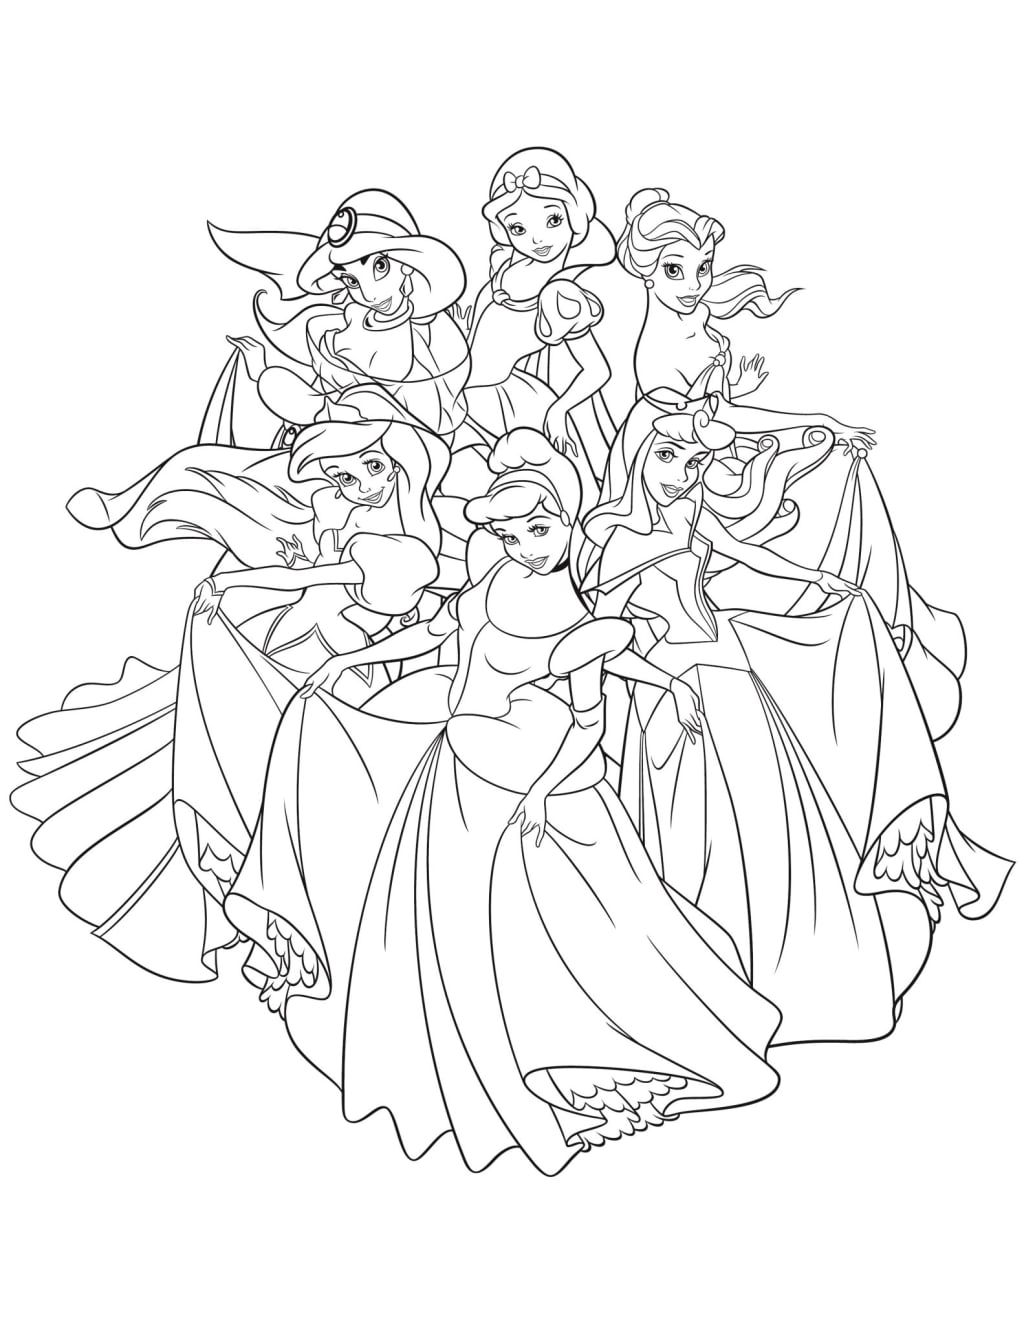 Disney Coloring Pages for Adult and Kids Part 1 by New Opportunity